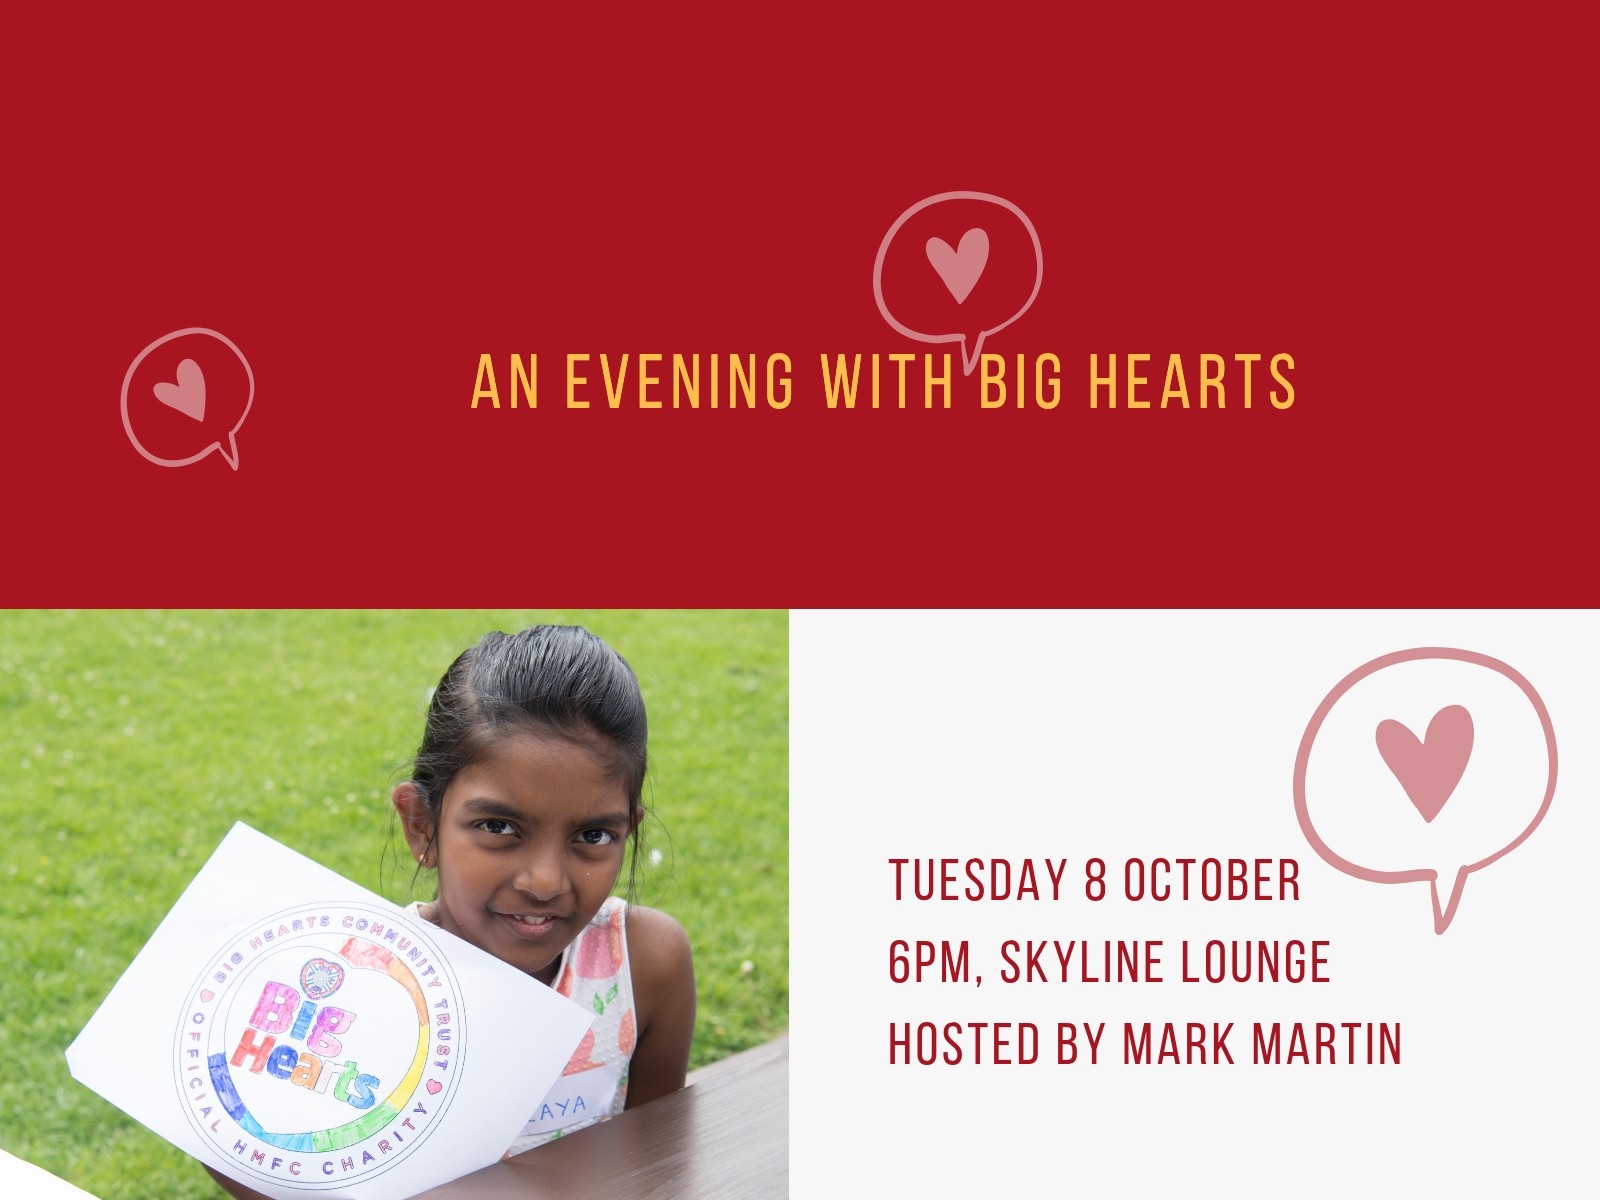  » An evening with Big Hearts: Come & join us on 8th October